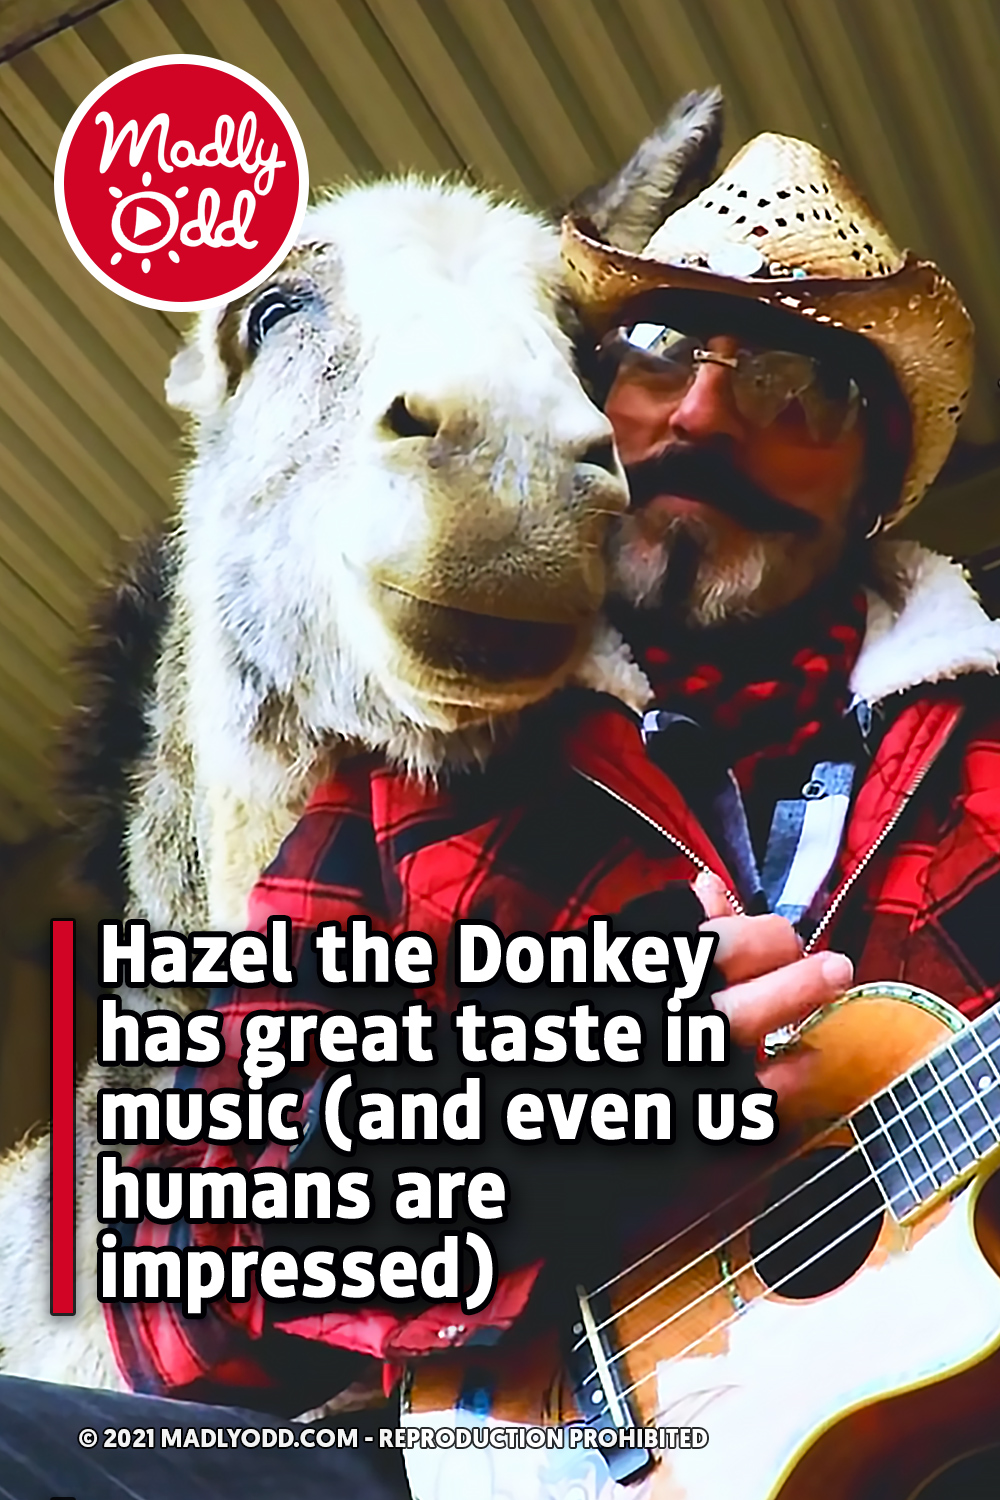 Hazel the Donkey has great taste in music (and even us humans are impressed)